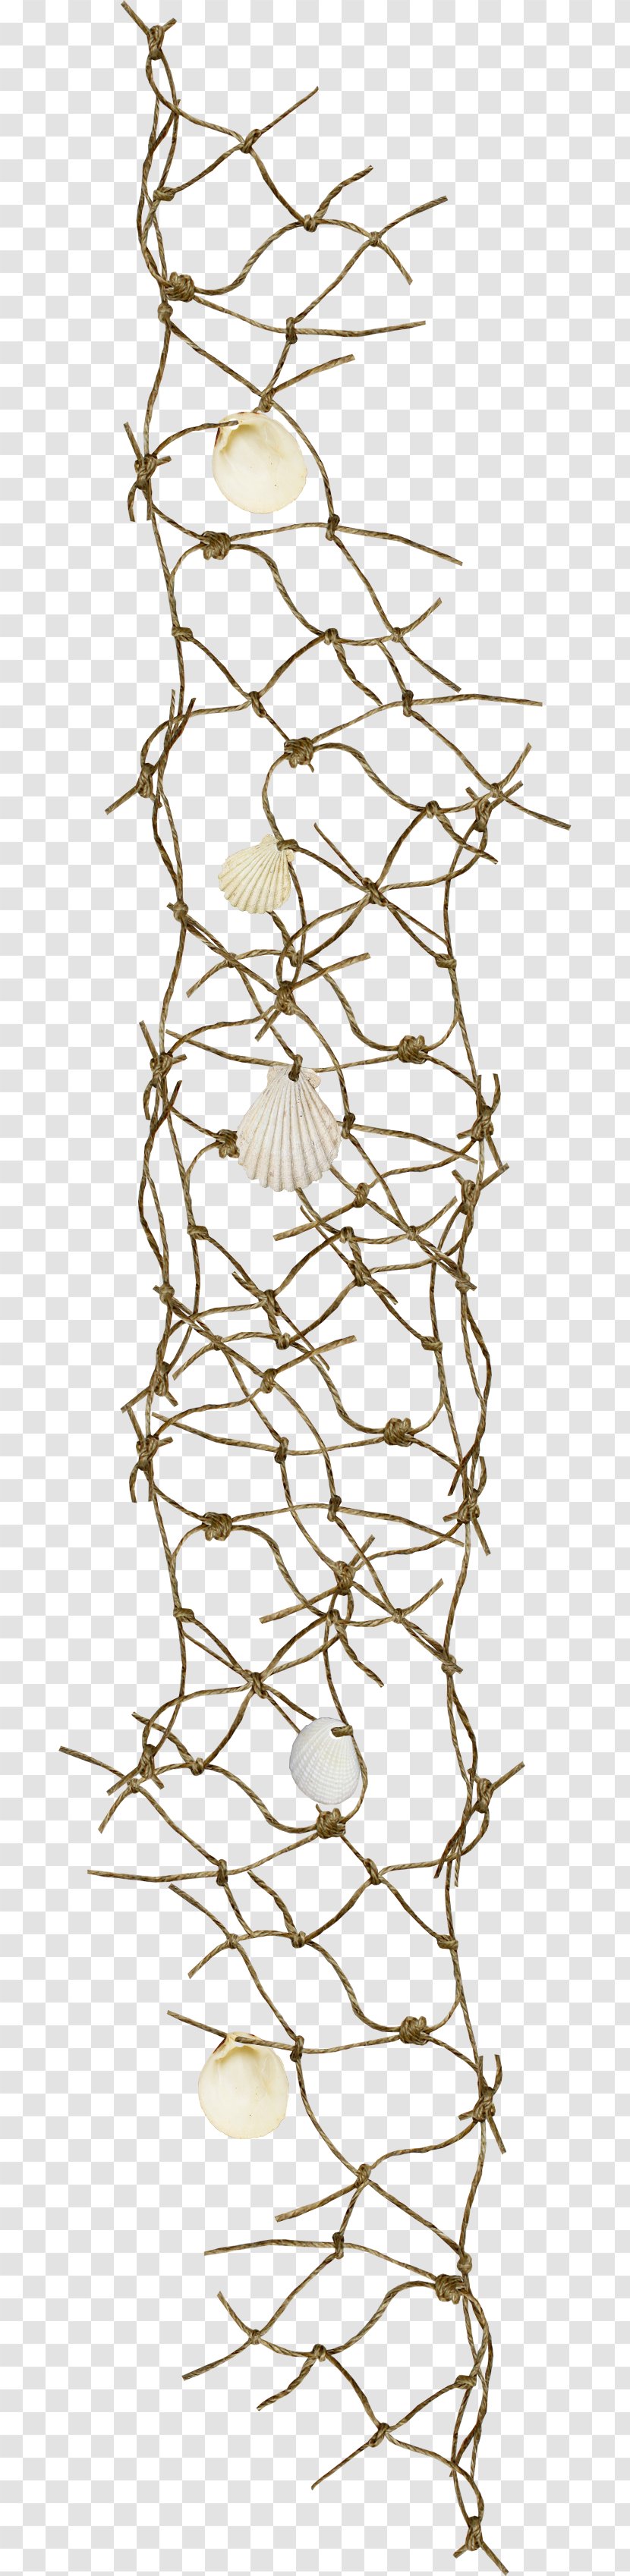 Fishing Net Rope Clip Art - Twig - Brown Nets Scallop Transparent PNG